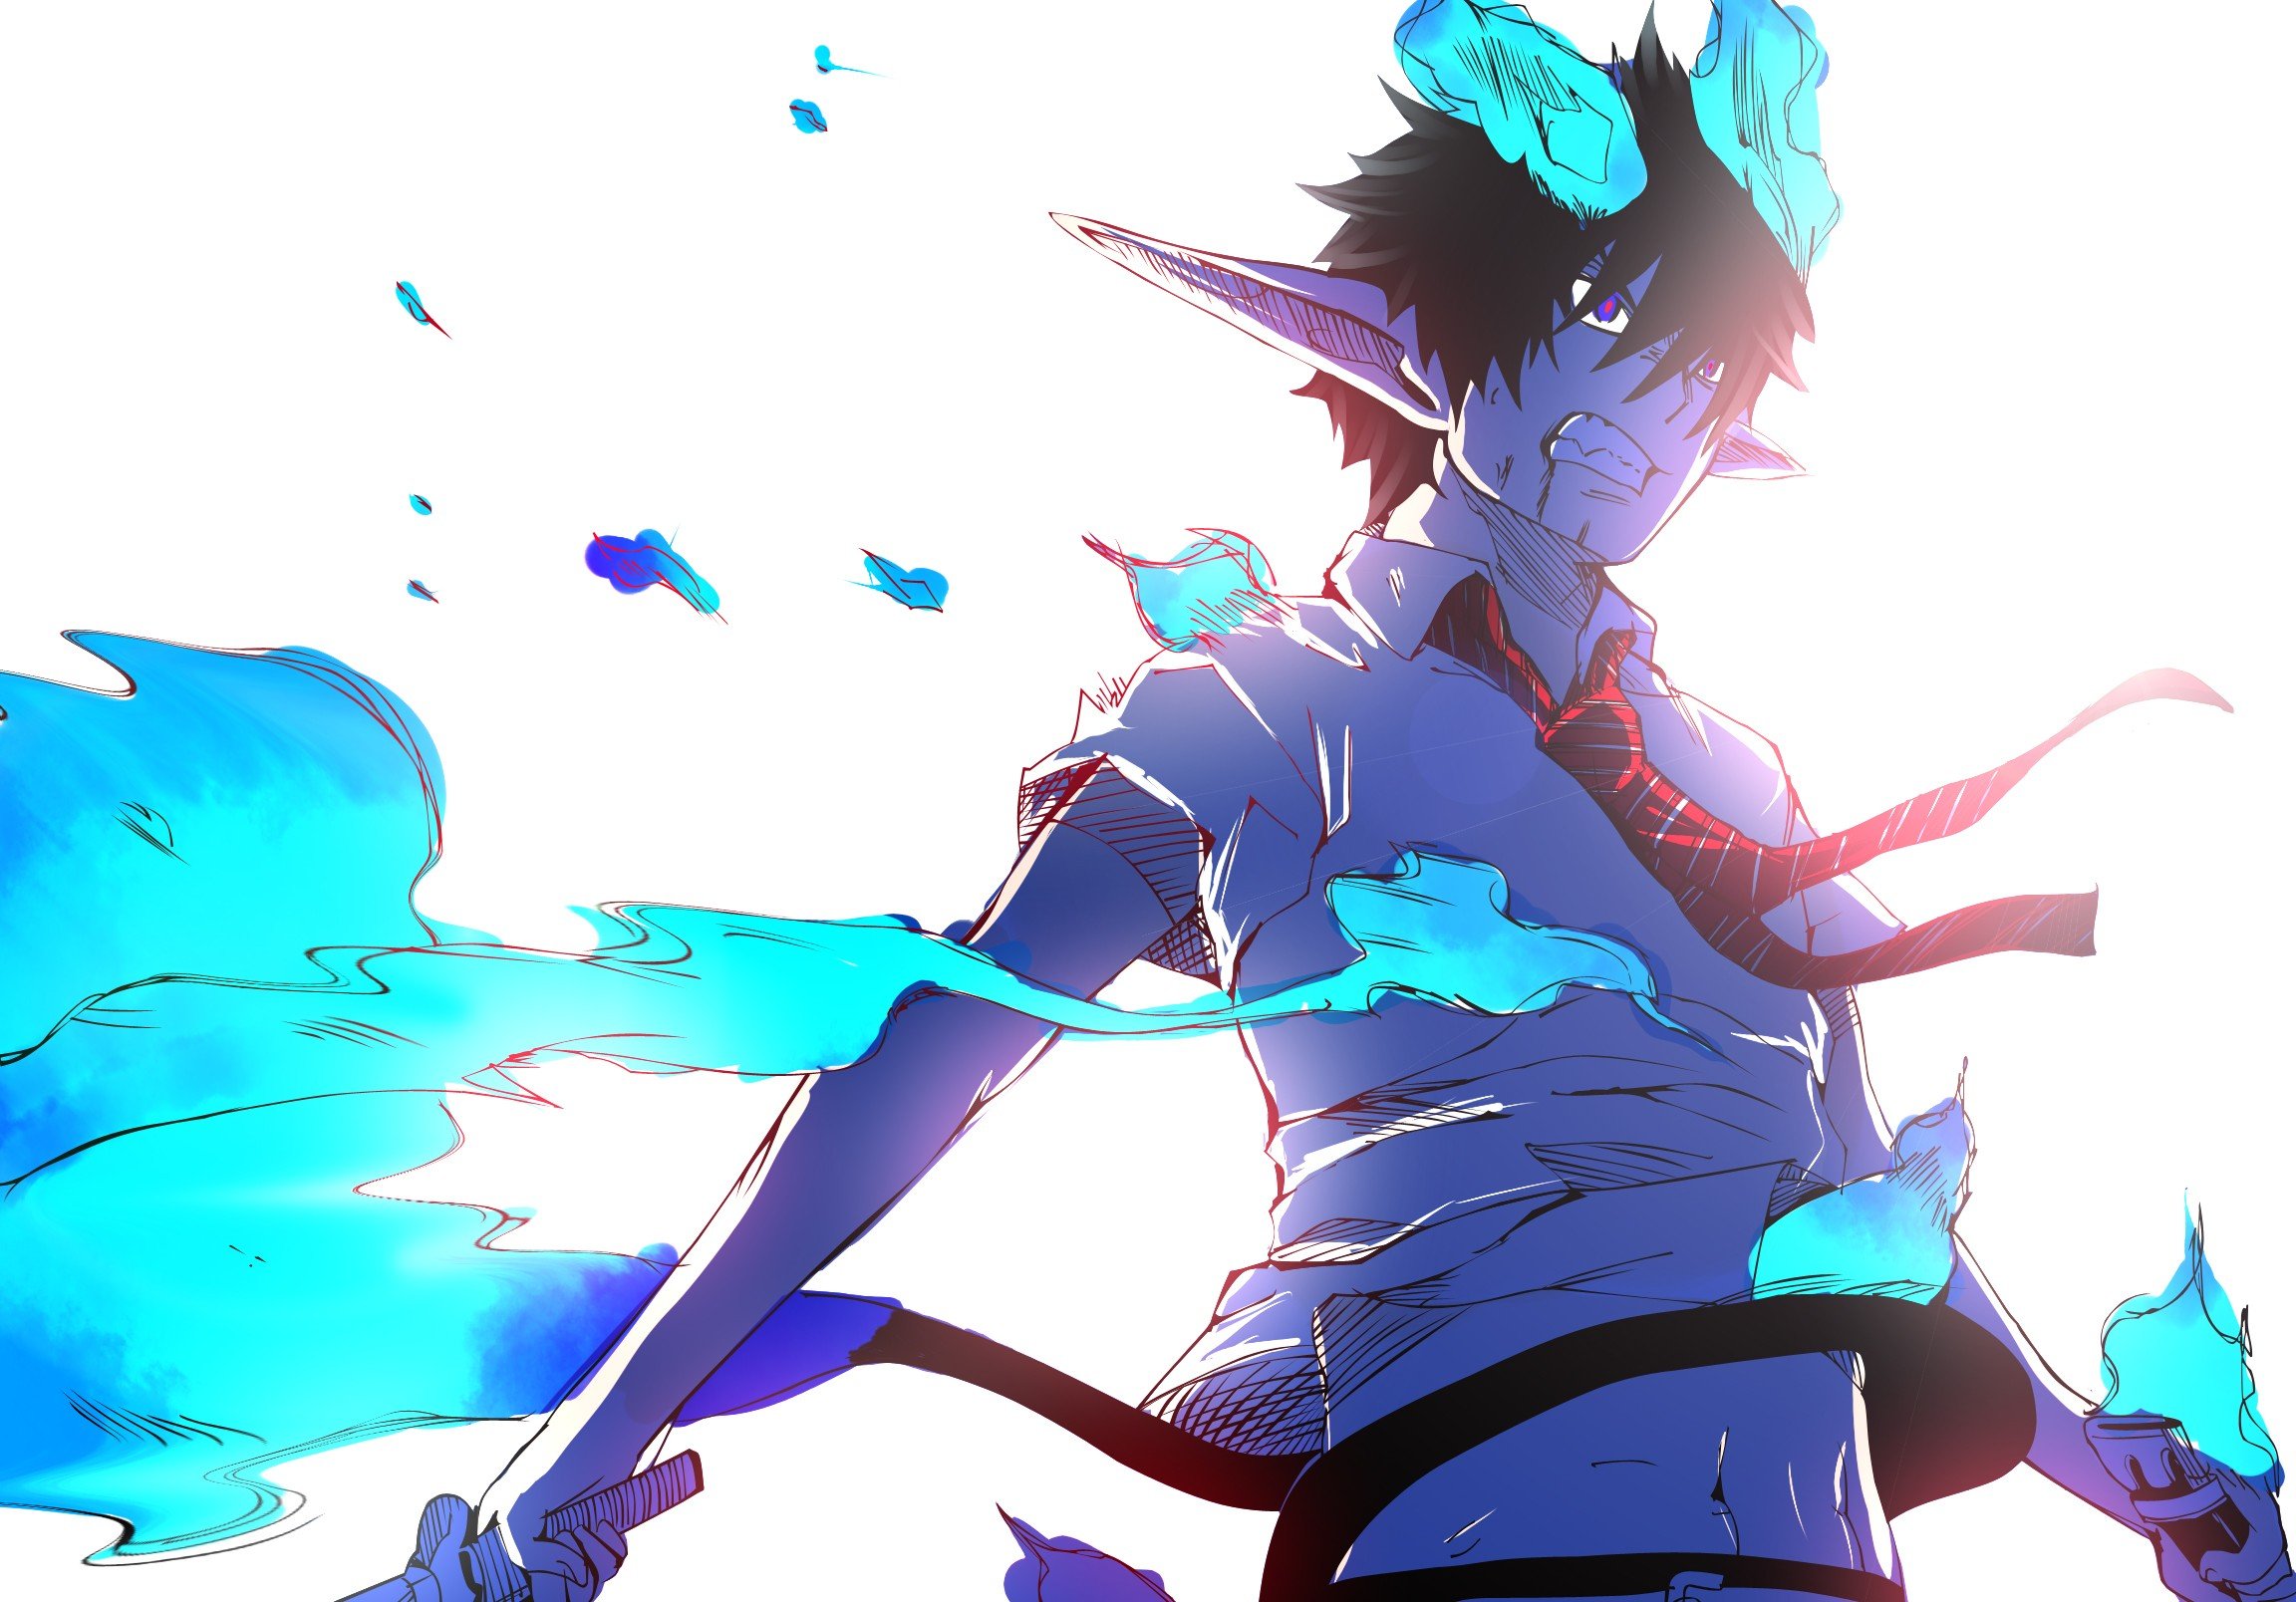 6. "Rin Okumura from Blue Exorcist" - wide 7